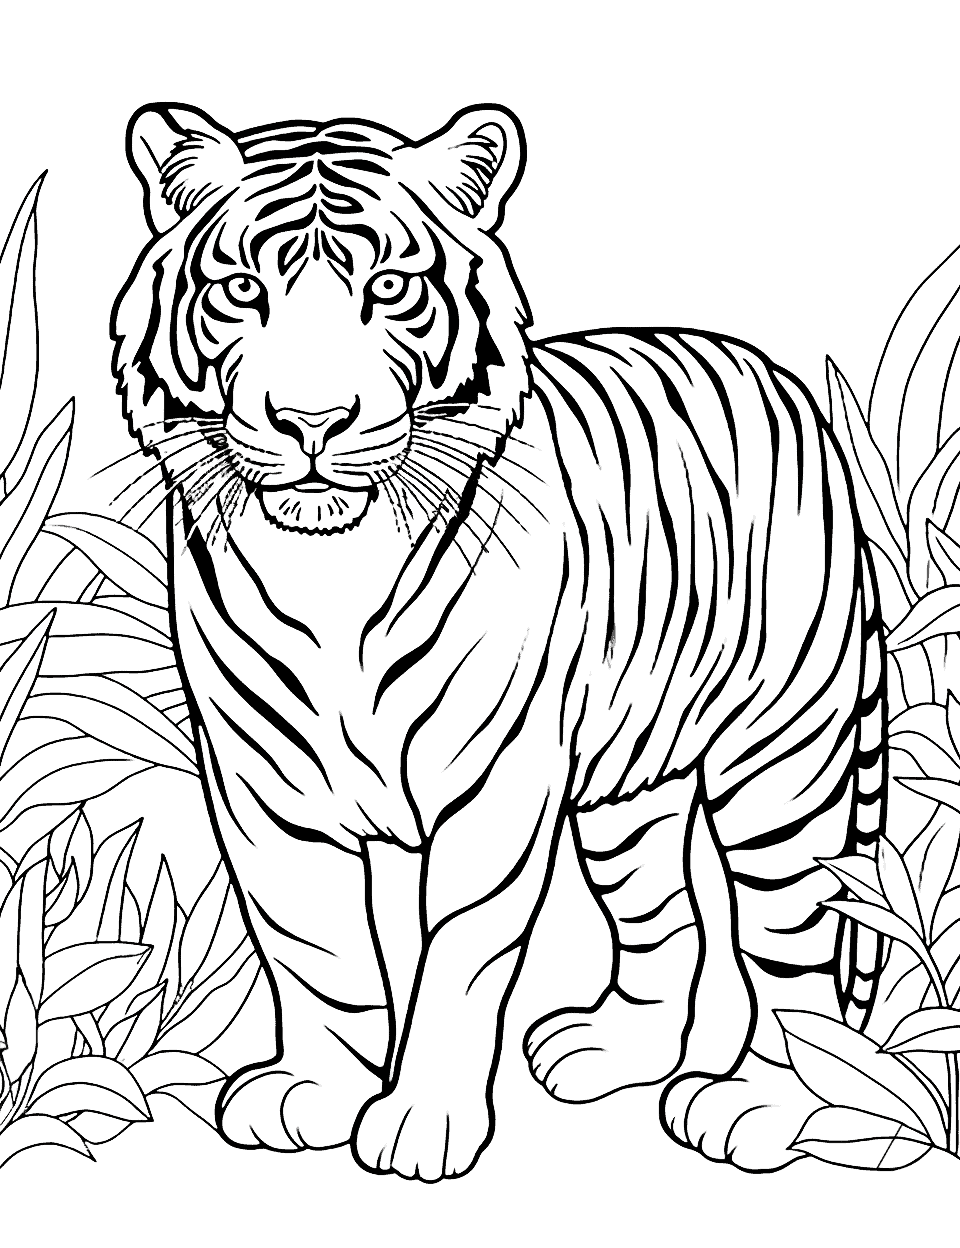 Tiger in the Jungle Animal Coloring Page - A powerful tiger prowling through a lush green jungle.